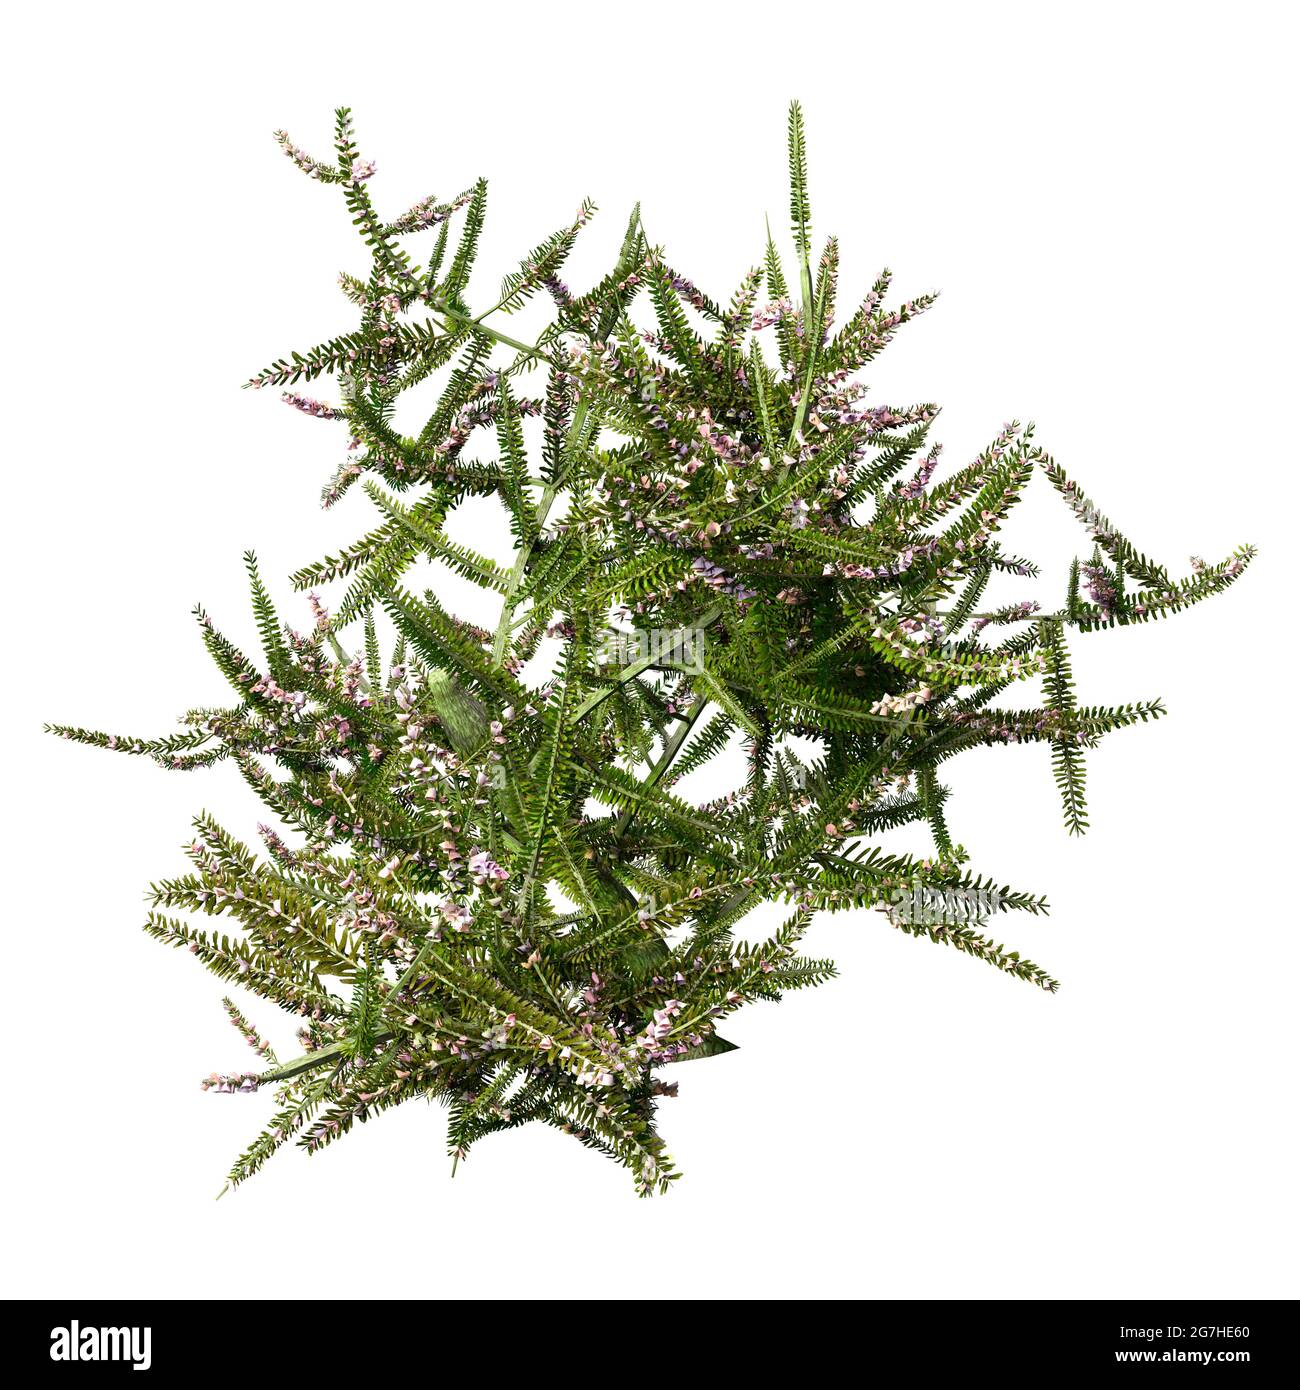 3D rendering of a blooming common heather plant or Calluna vulgaris isolated on white background Stock Photo